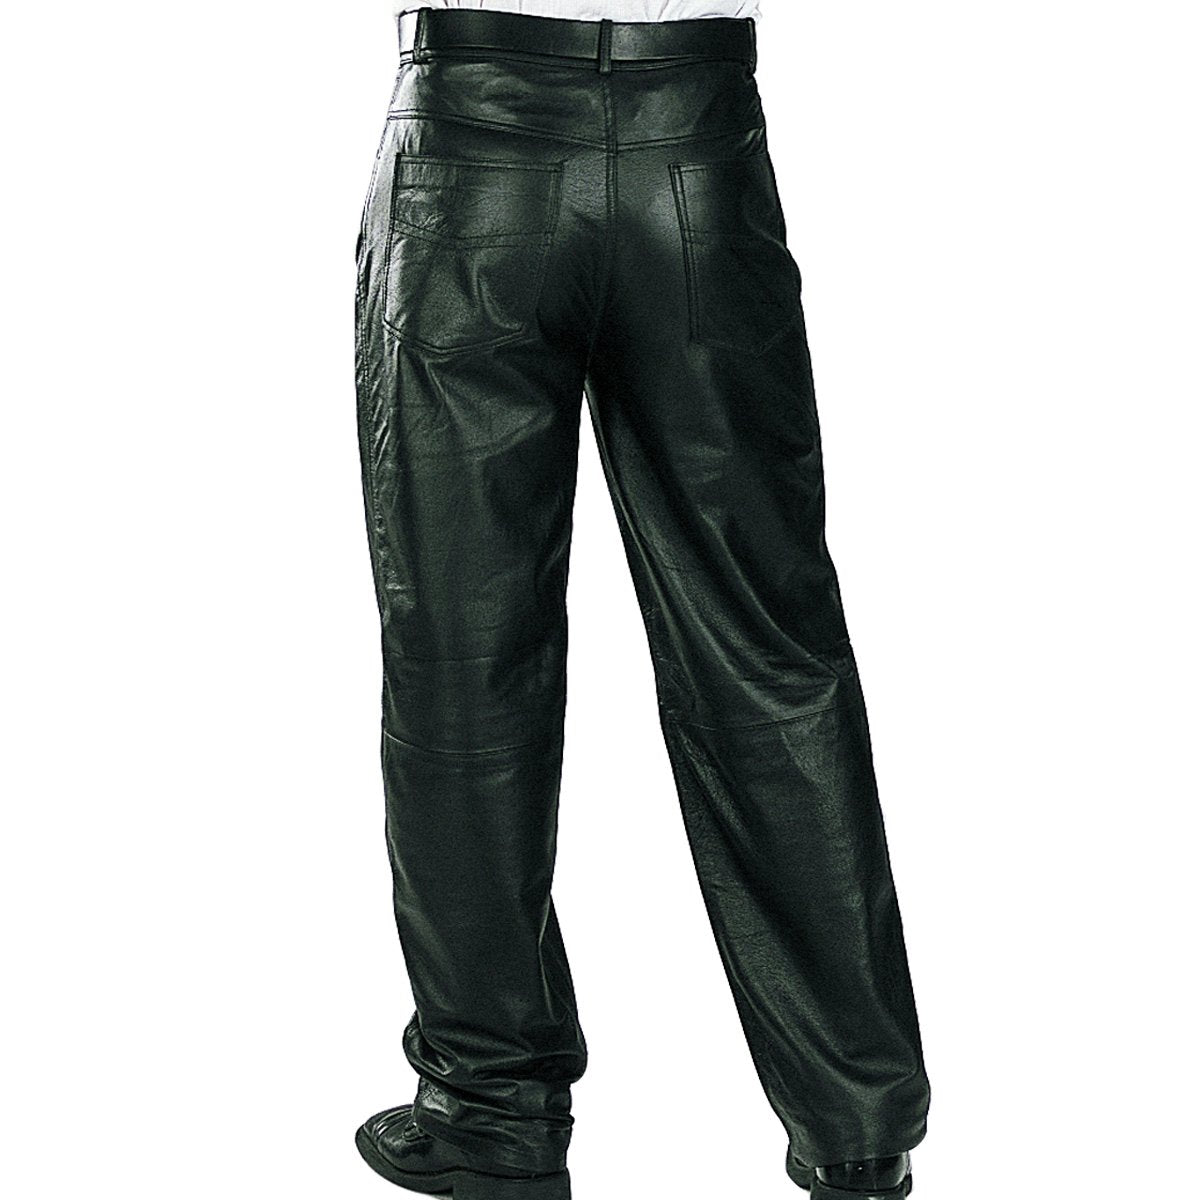 Mens Motorcycle Black Leather Pants Jeans Style Motorcycle Riding Pants for  Biker with 5 Pockets 